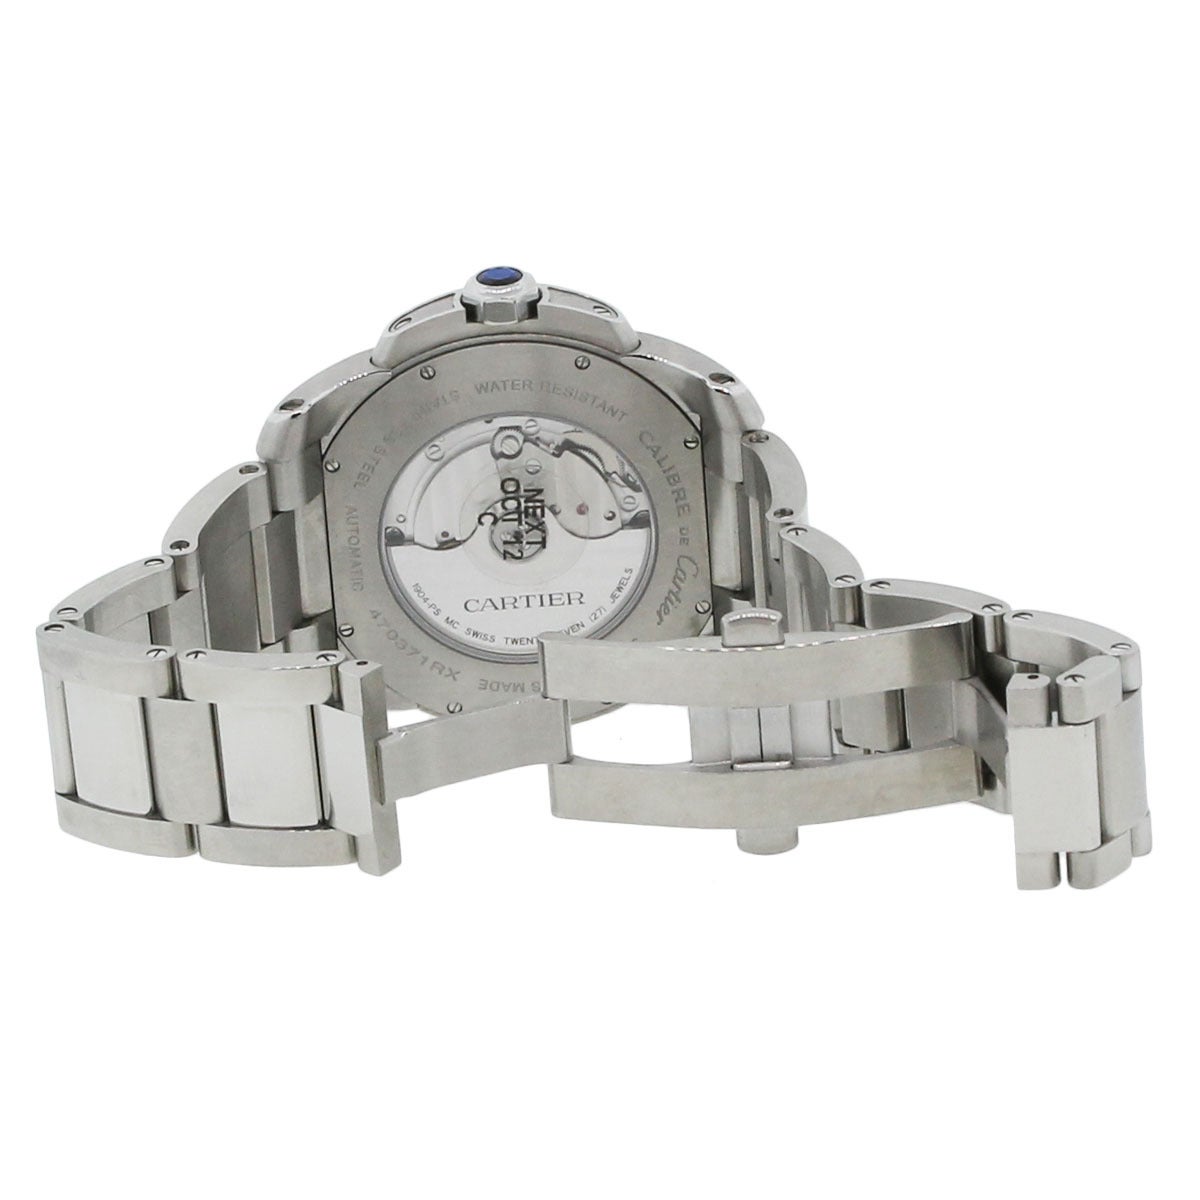 Cartier Stainless Steel Calibre Chronograph Automatic Wristwatch Ref 3389 1